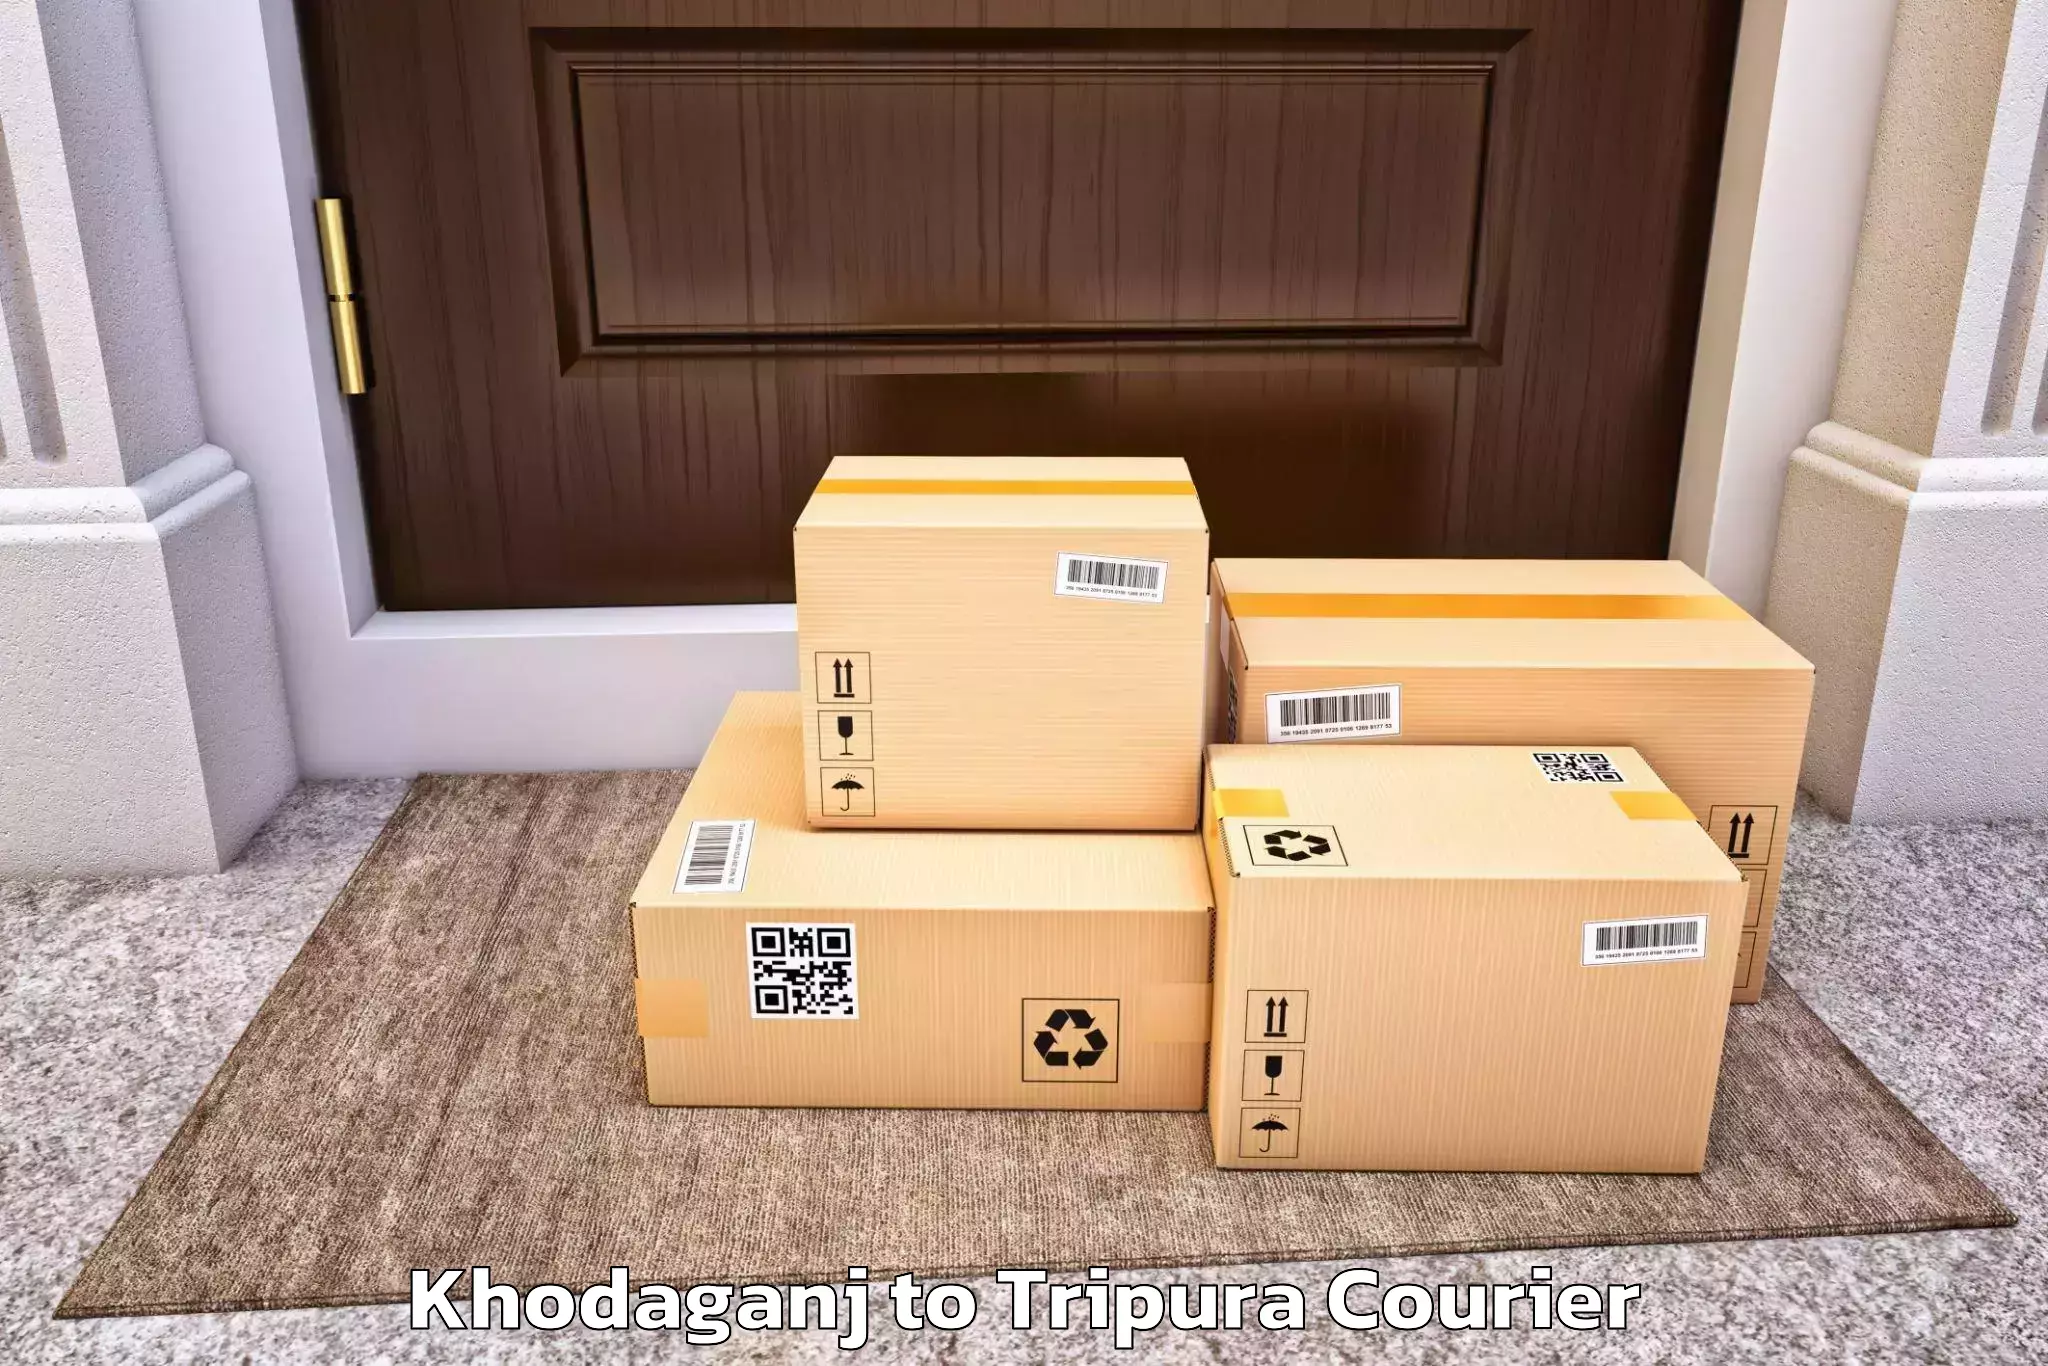 Furniture delivery service in Khodaganj to Dhalai